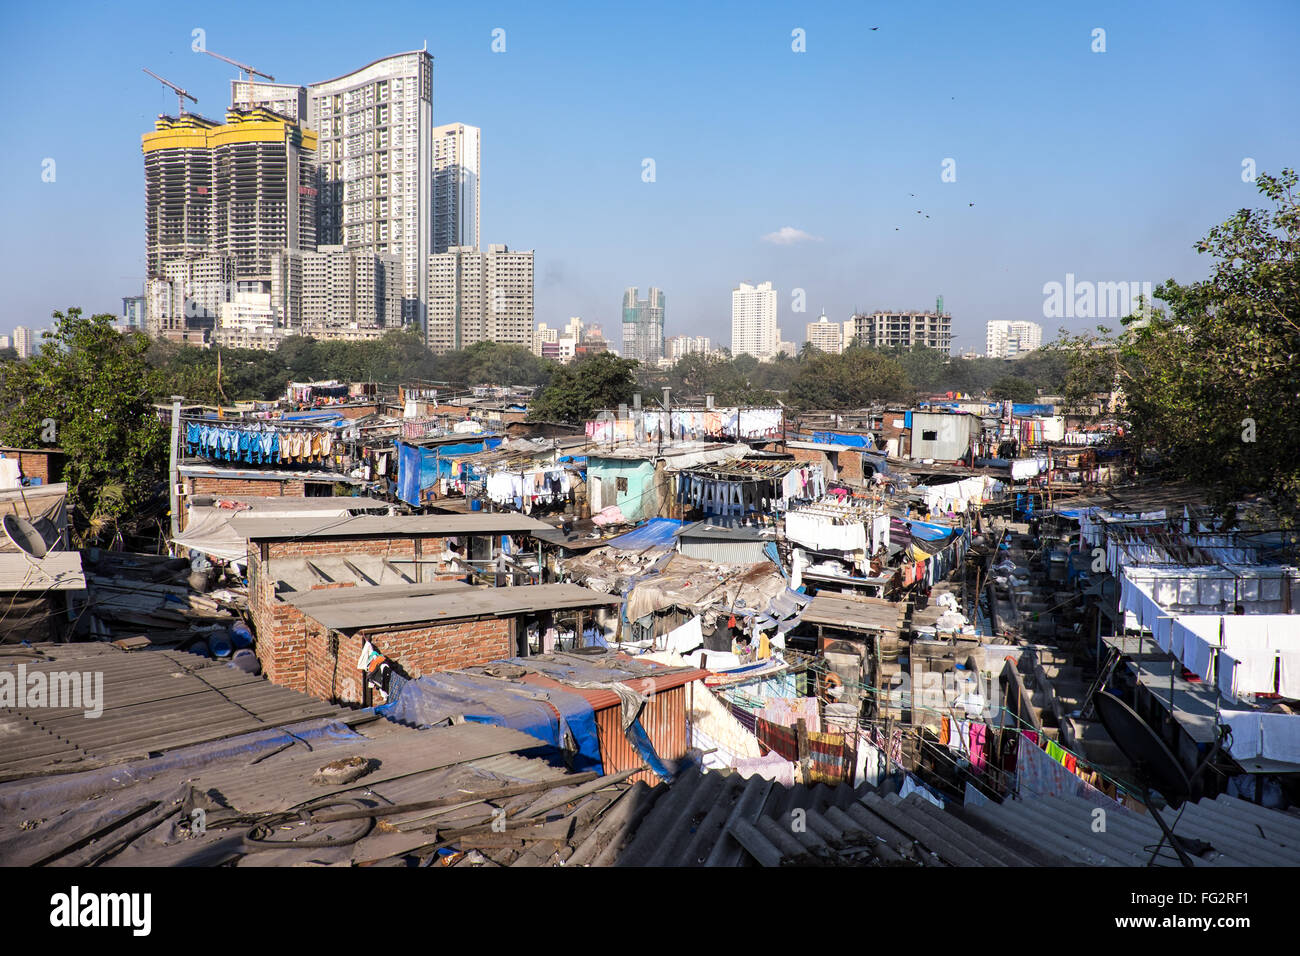 Central Mumbai's mix of slums and high rise buildings, India Stock Photo